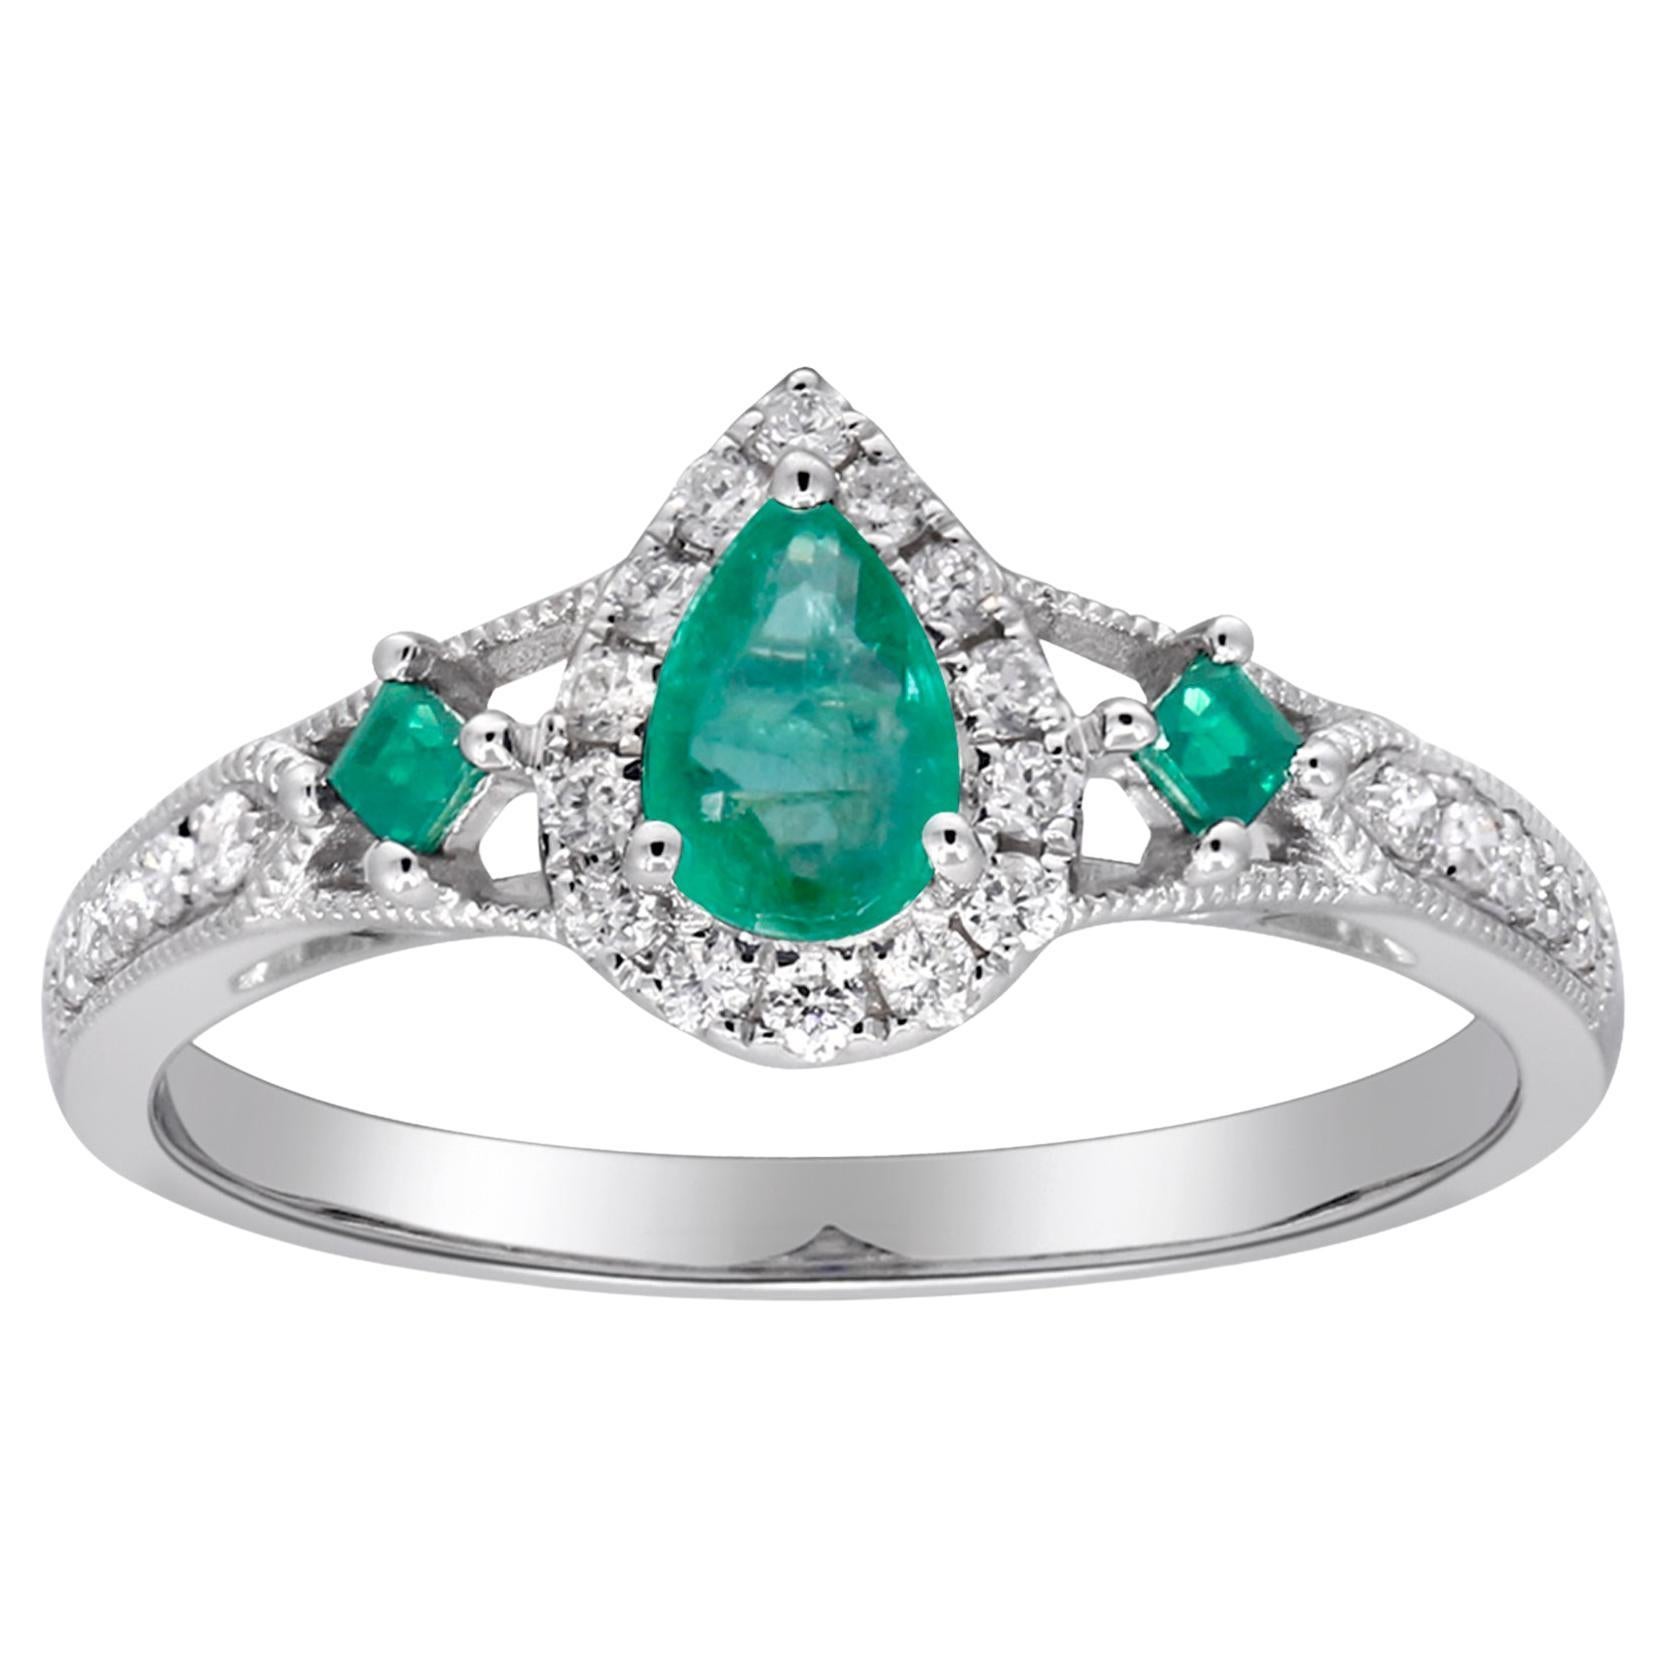 0.32 Carat Pear Cut and 0.10 Round Cut Emerald Diamond Accents 14KW Gold Ring For Sale